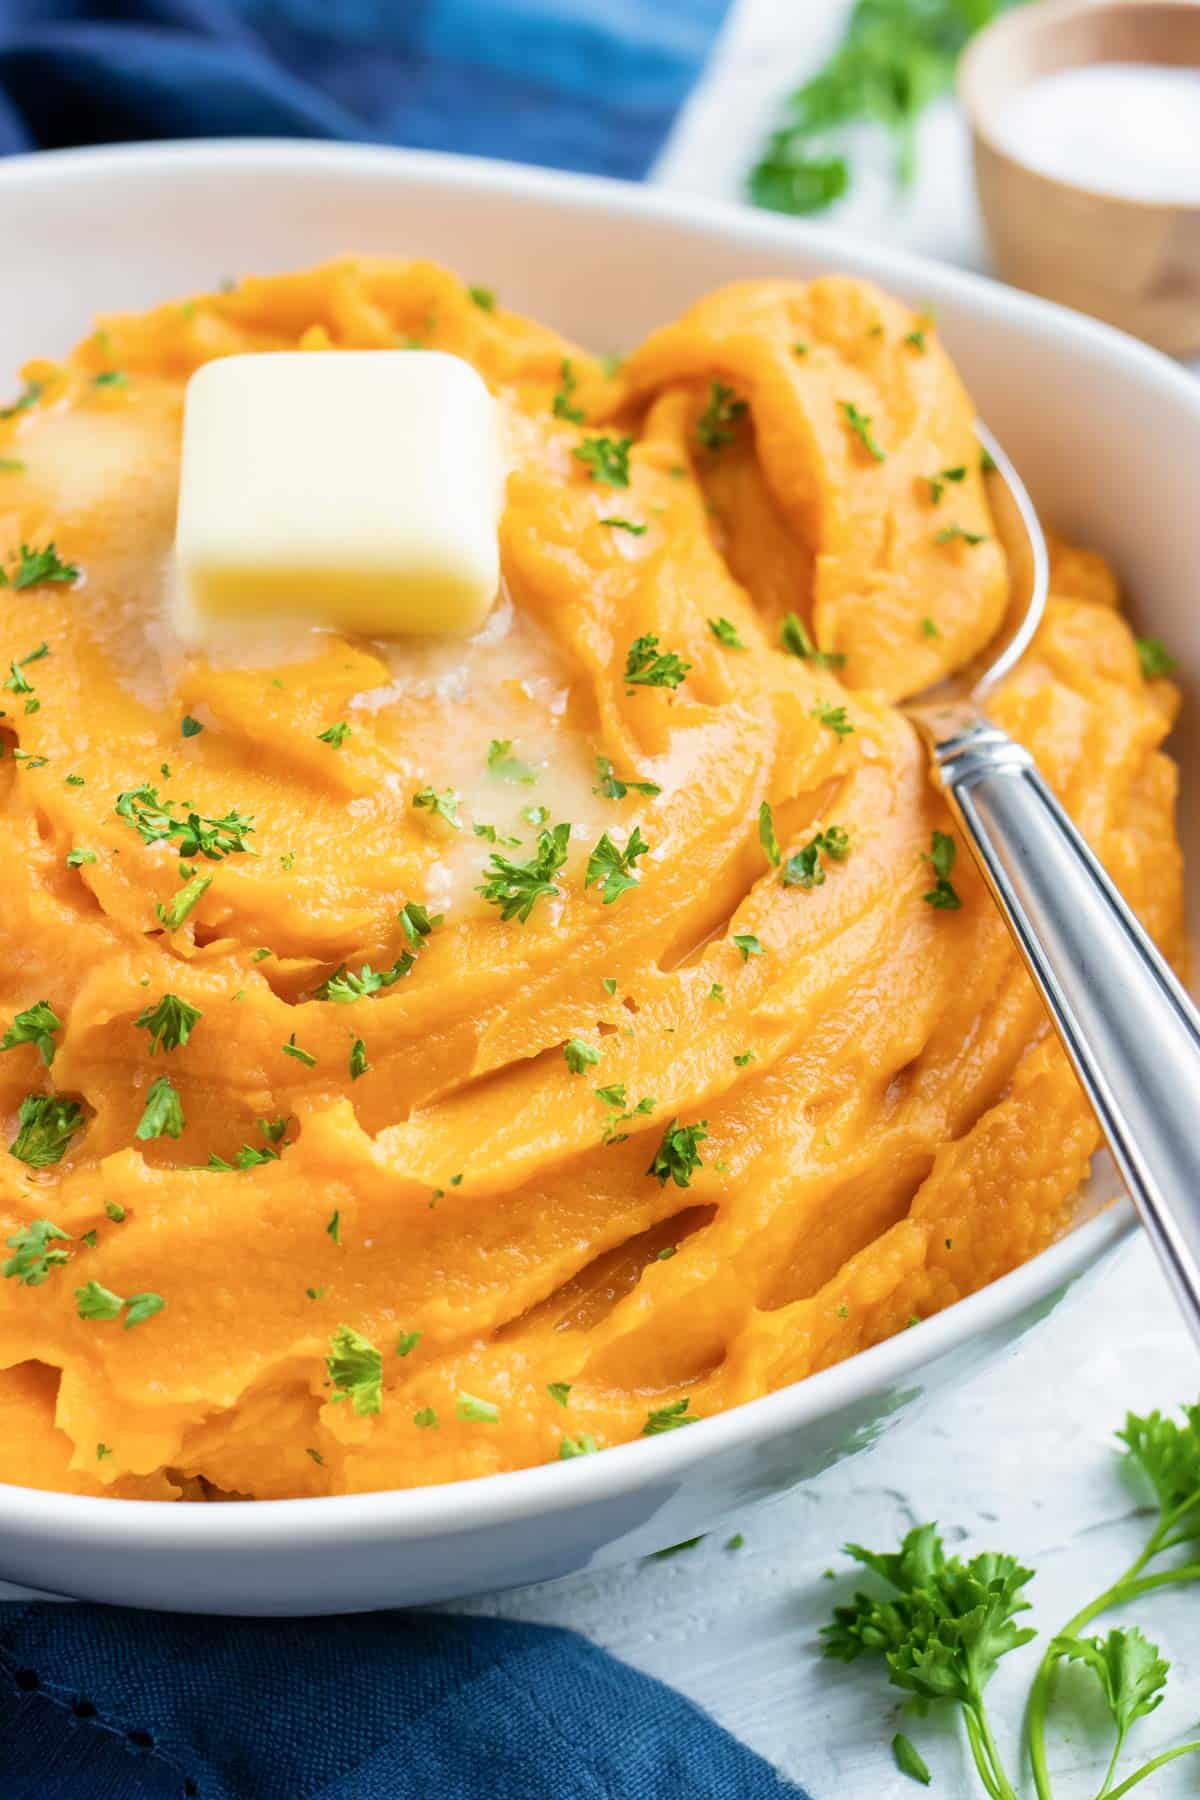 Healthy mashed sweet potatoes recipe using boiled or baked potatoes.